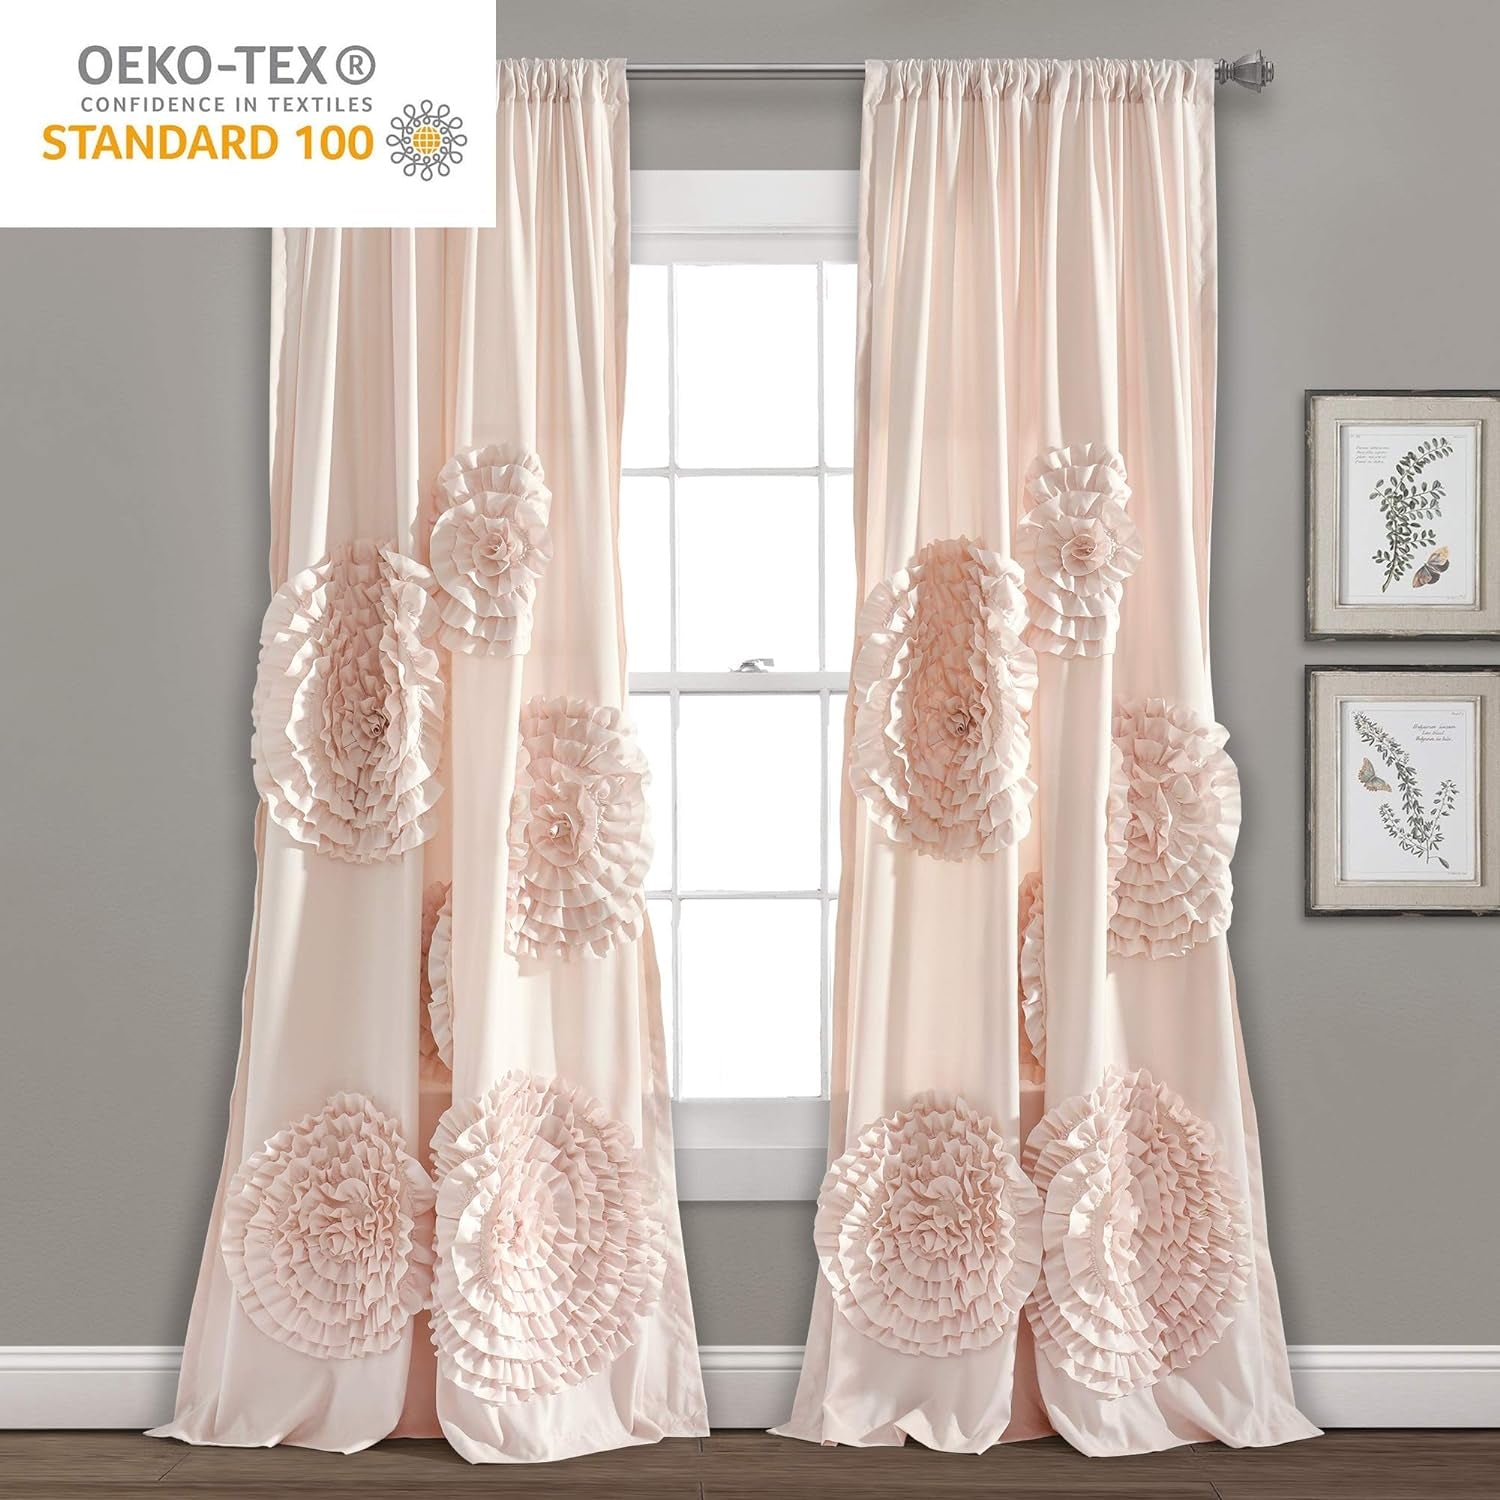 Lush Decor Serena Window Curtain Panel, Single Panel, 54" W X 84" L, Blush - Ruched Ruffled Flower Design - Ruffle Curtains for Bedroom, Living & Dining Room - Vintage Glam & Farmhouse Home Decor  Triangle Home Fashions   